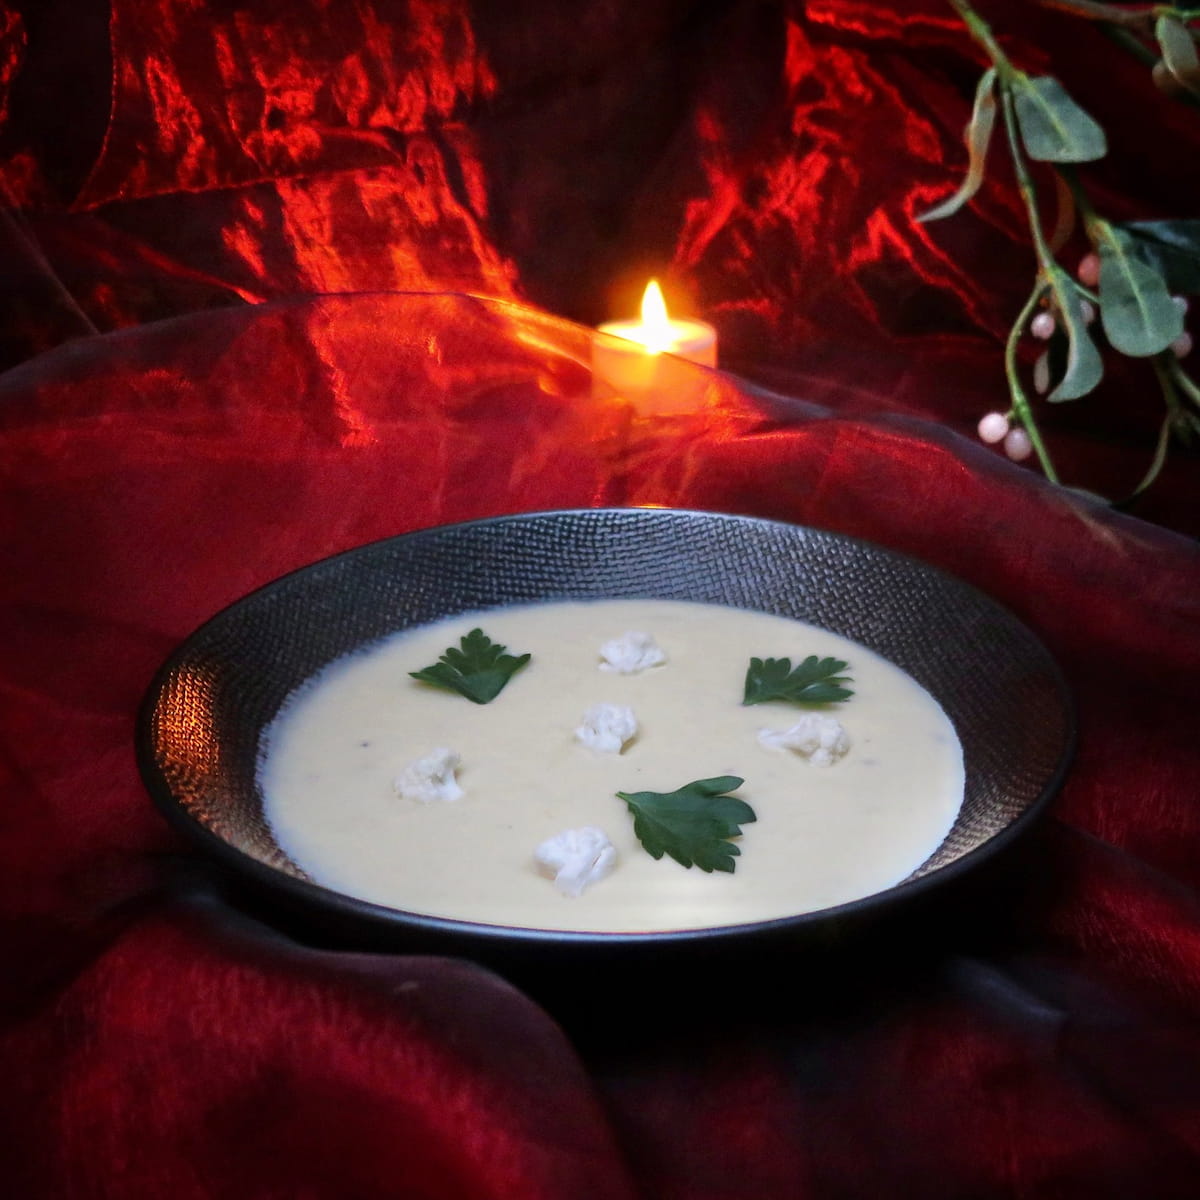 black bowl of creamy soup with cauliflower florets on silk red, mistletoe and candle lit